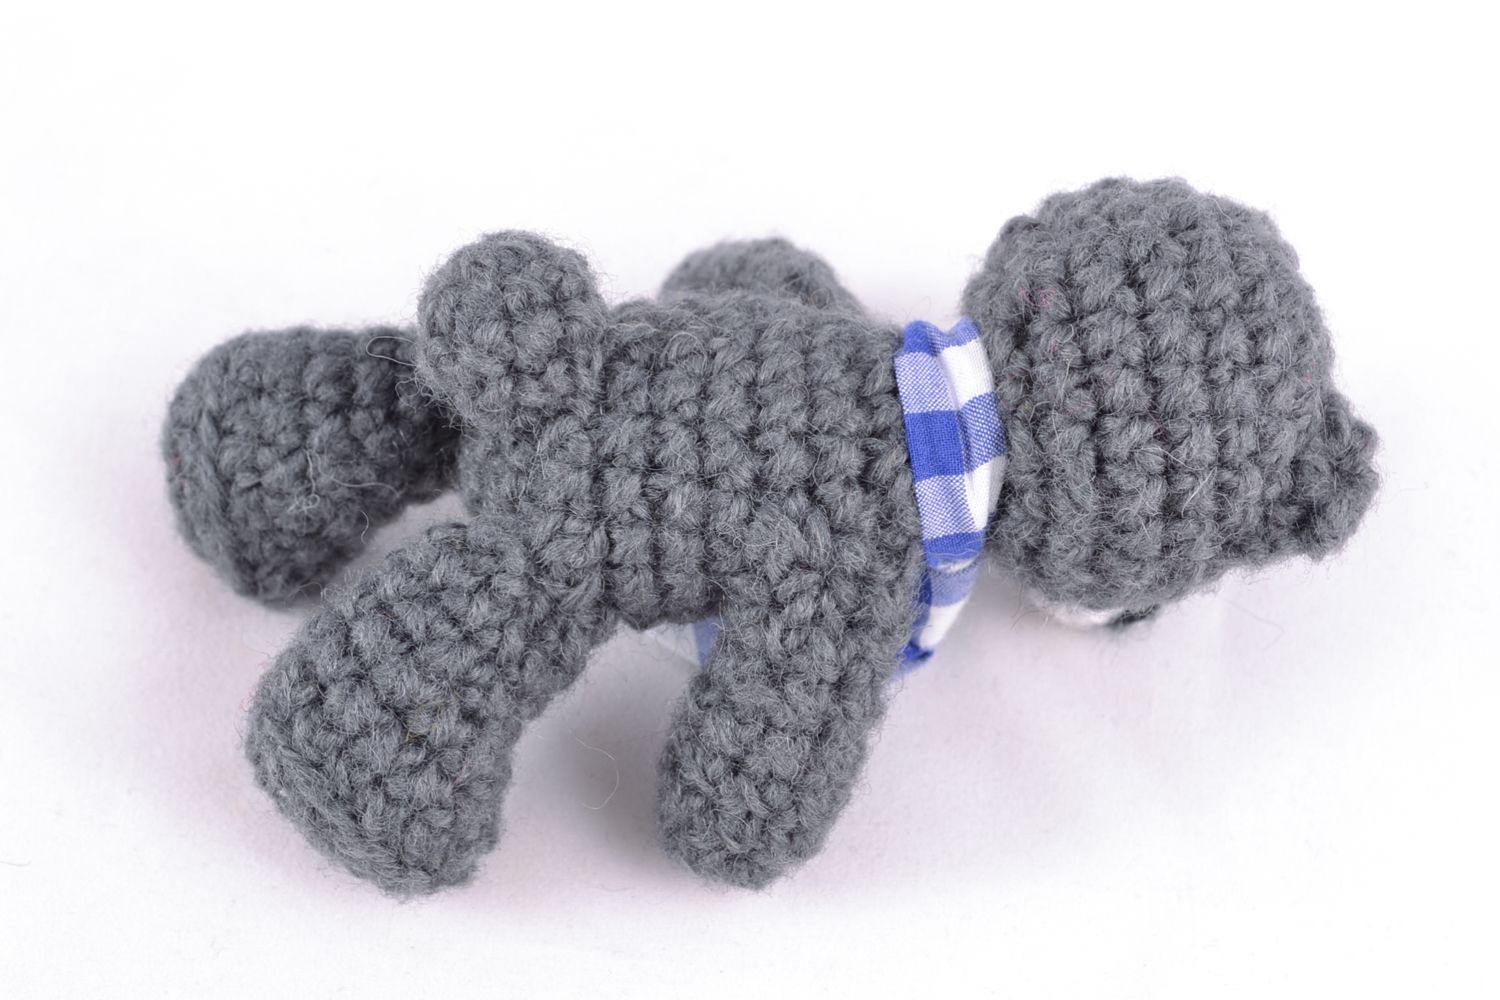 Handmade toy crocheted in the shape of bear photo 3